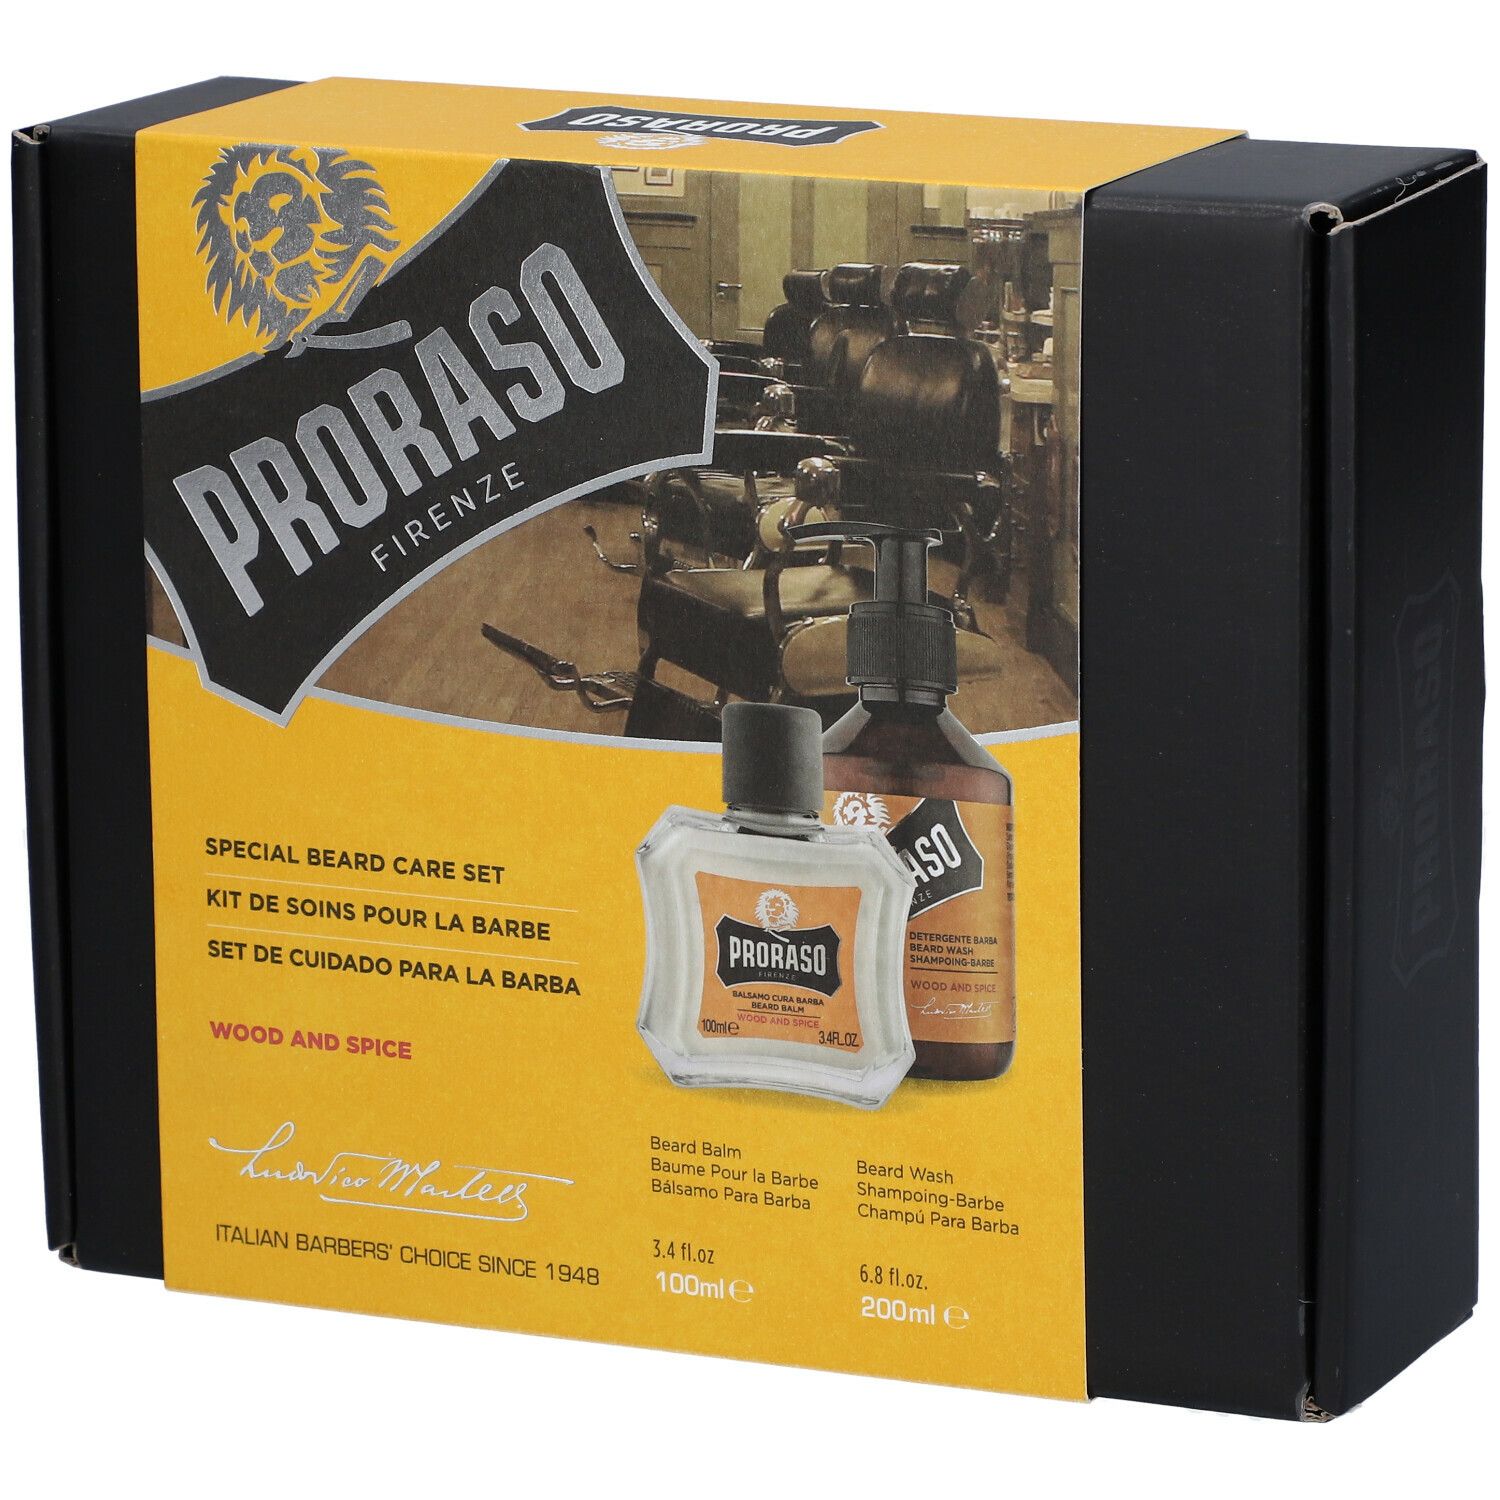 Proraso Wood and Spice Special Beard Care Set 1 set